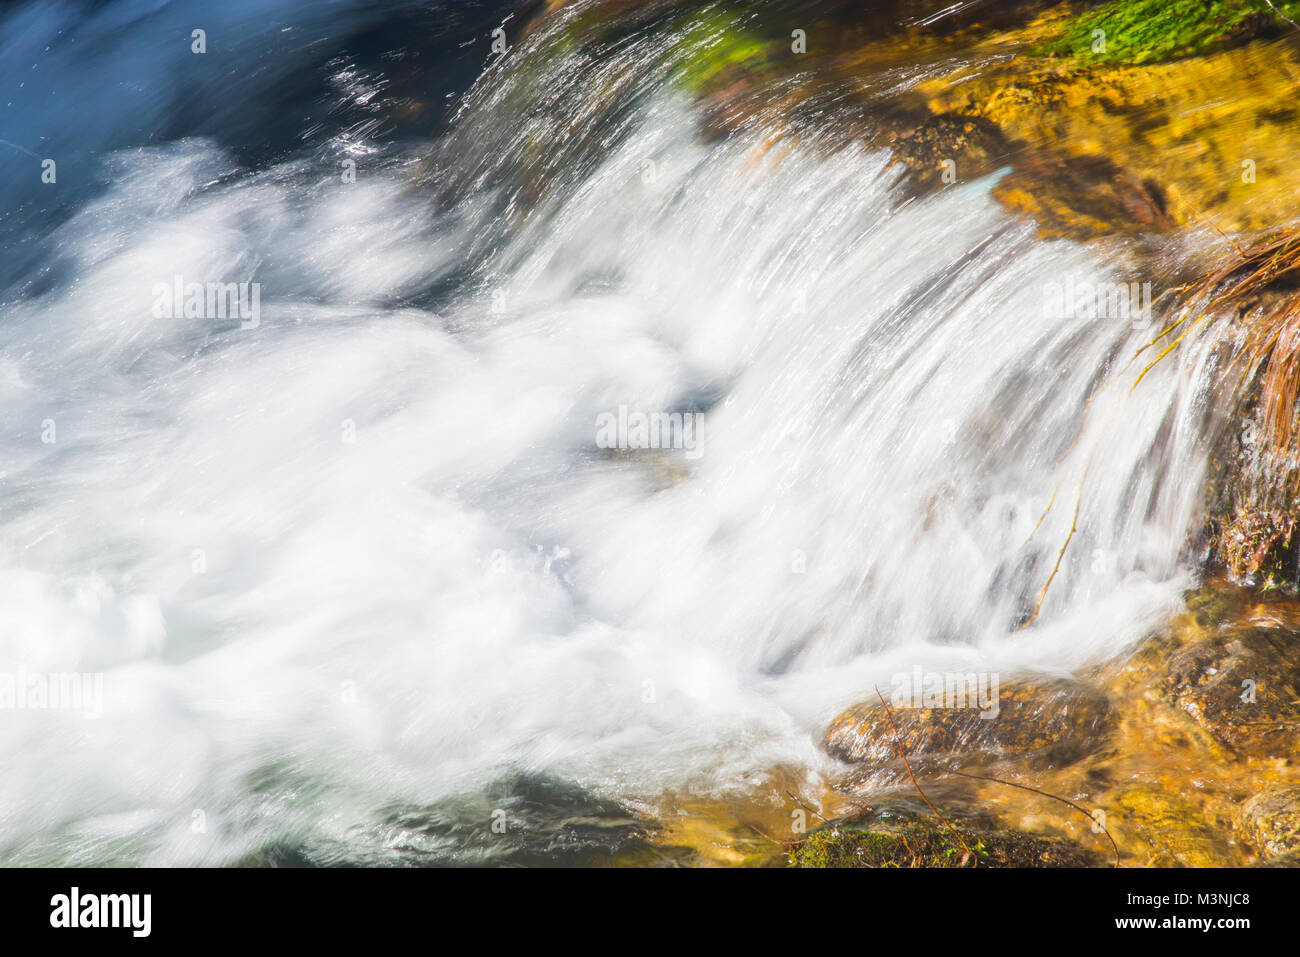 Water stream and cascade. Stock Photo